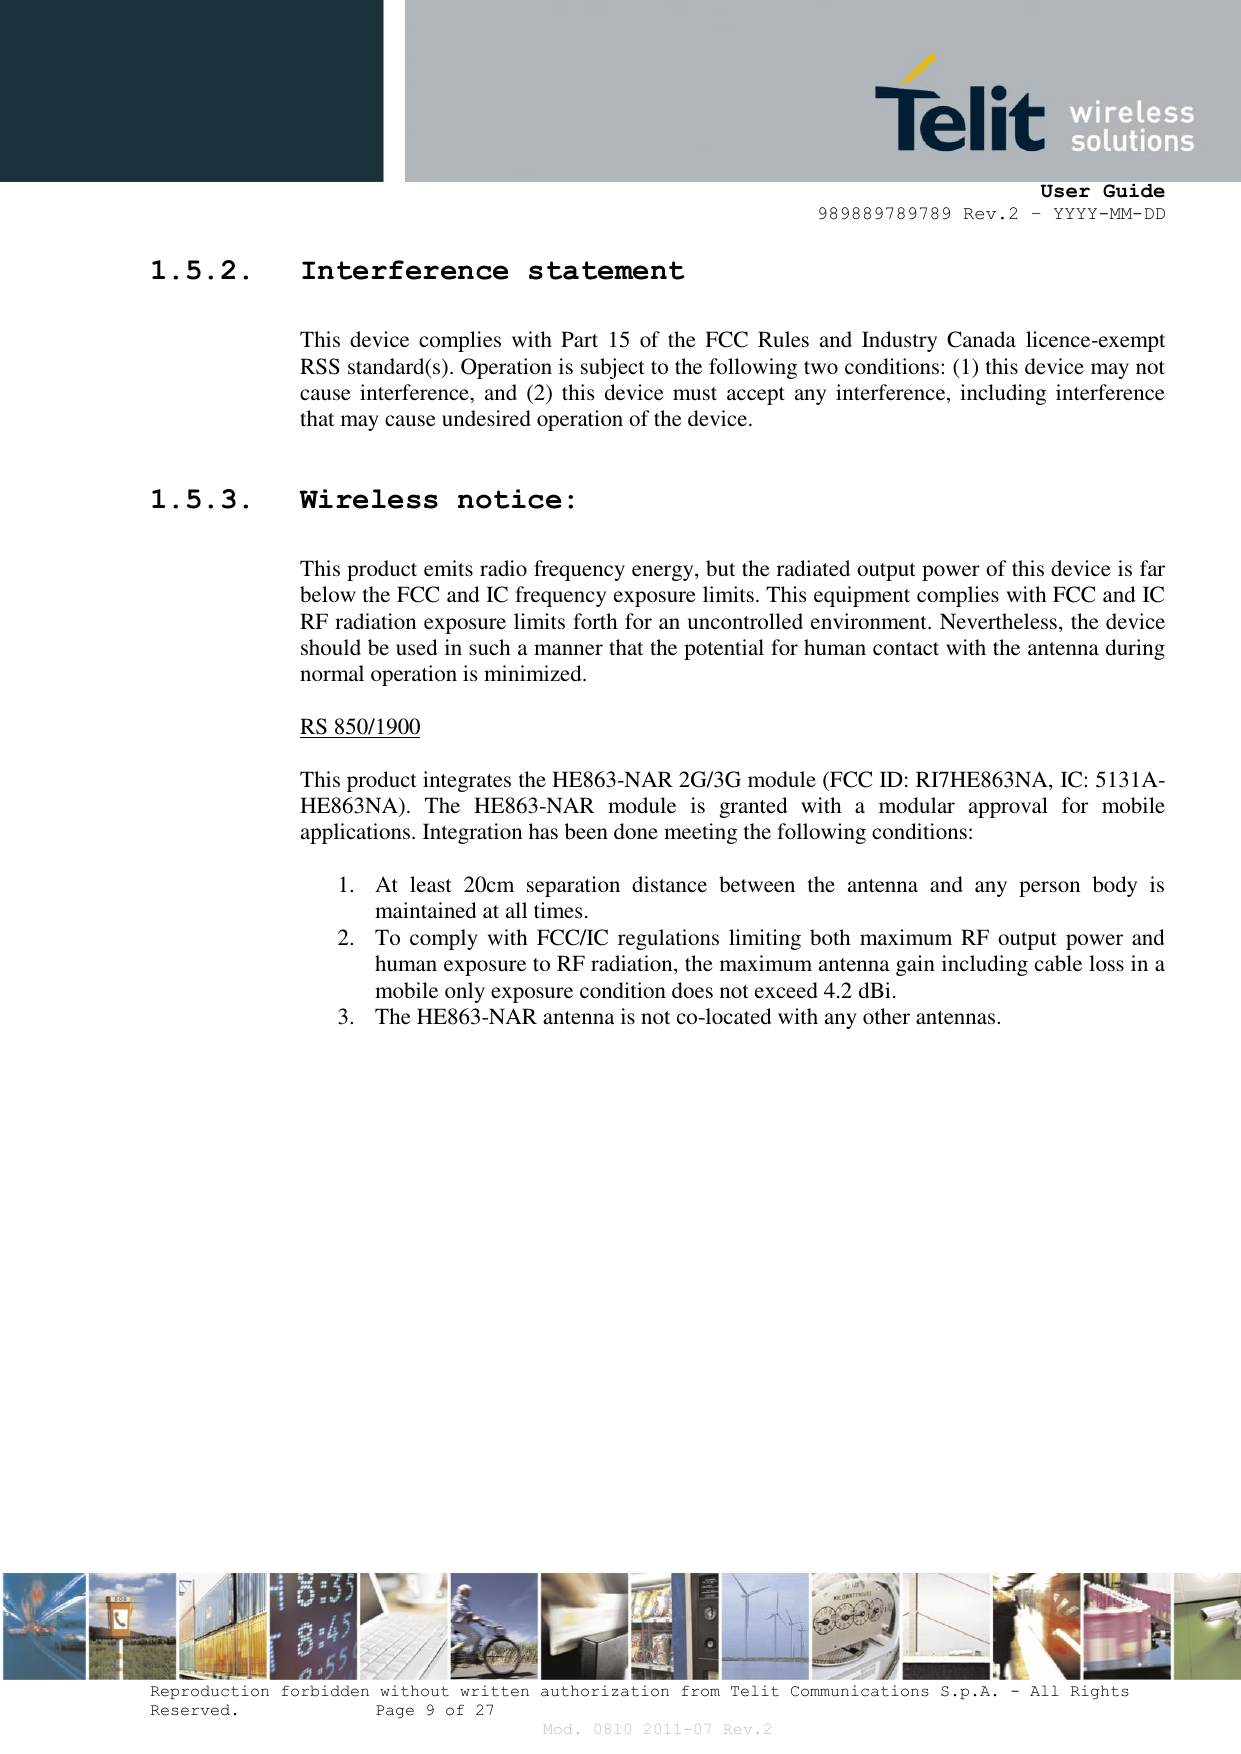      User Guide 989889789789 Rev.2 – YYYY-MM-DD  Reproduction forbidden without written authorization from Telit Communications S.p.A. - All Rights Reserved.    Page 9 of 27 Mod. 0810 2011-07 Rev.2 1.5.2. Interference statement  This  device  complies with Part  15  of  the FCC  Rules and  Industry  Canada licence-exempt RSS standard(s). Operation is subject to the following two conditions: (1) this device may not cause interference, and  (2) this  device must accept  any interference, including interference that may cause undesired operation of the device.  1.5.3. Wireless notice:  This product emits radio frequency energy, but the radiated output power of this device is far below the FCC and IC frequency exposure limits. This equipment complies with FCC and IC RF radiation exposure limits forth for an uncontrolled environment. Nevertheless, the device should be used in such a manner that the potential for human contact with the antenna during normal operation is minimized.  RS 850/1900  This product integrates the HE863-NAR 2G/3G module (FCC ID: RI7HE863NA, IC: 5131A-HE863NA).  The  HE863-NAR module  is  granted  with  a  modular  approval  for  mobile applications. Integration has been done meeting the following conditions:  1. At  least  20cm  separation  distance  between  the  antenna  and  any  person  body  is maintained at all times. 2. To comply with  FCC/IC regulations limiting both  maximum  RF output  power and human exposure to RF radiation, the maximum antenna gain including cable loss in a mobile only exposure condition does not exceed 4.2 dBi. 3. The HE863-NAR antenna is not co-located with any other antennas.     